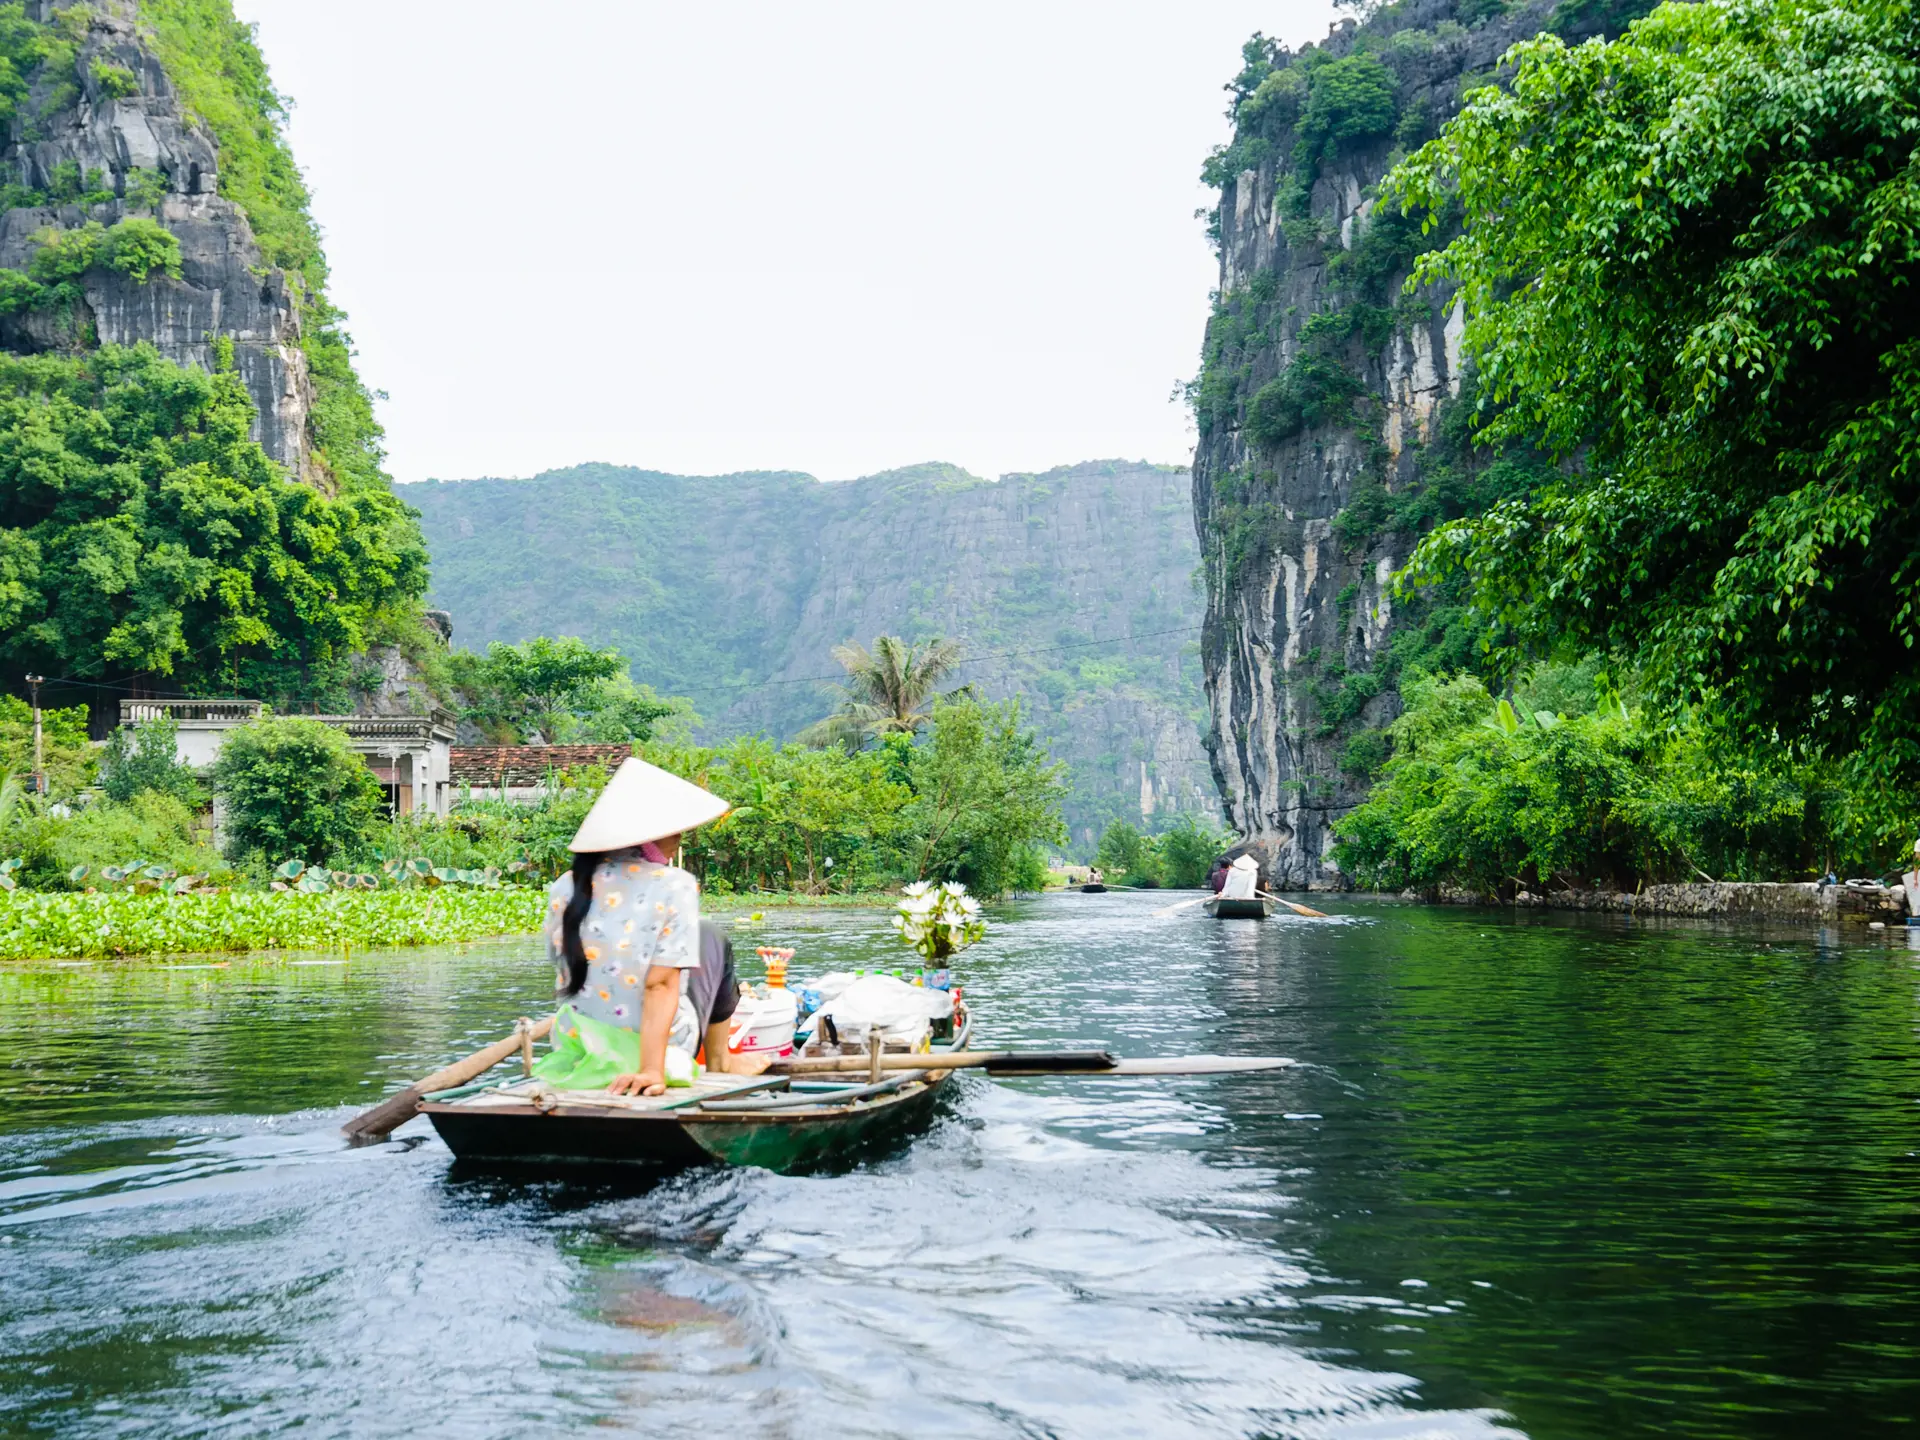 The woman is paddling groceries and fresh flowers boat. Tam Coc Grotto, Ninh Binh Province, Vietnam.jpg